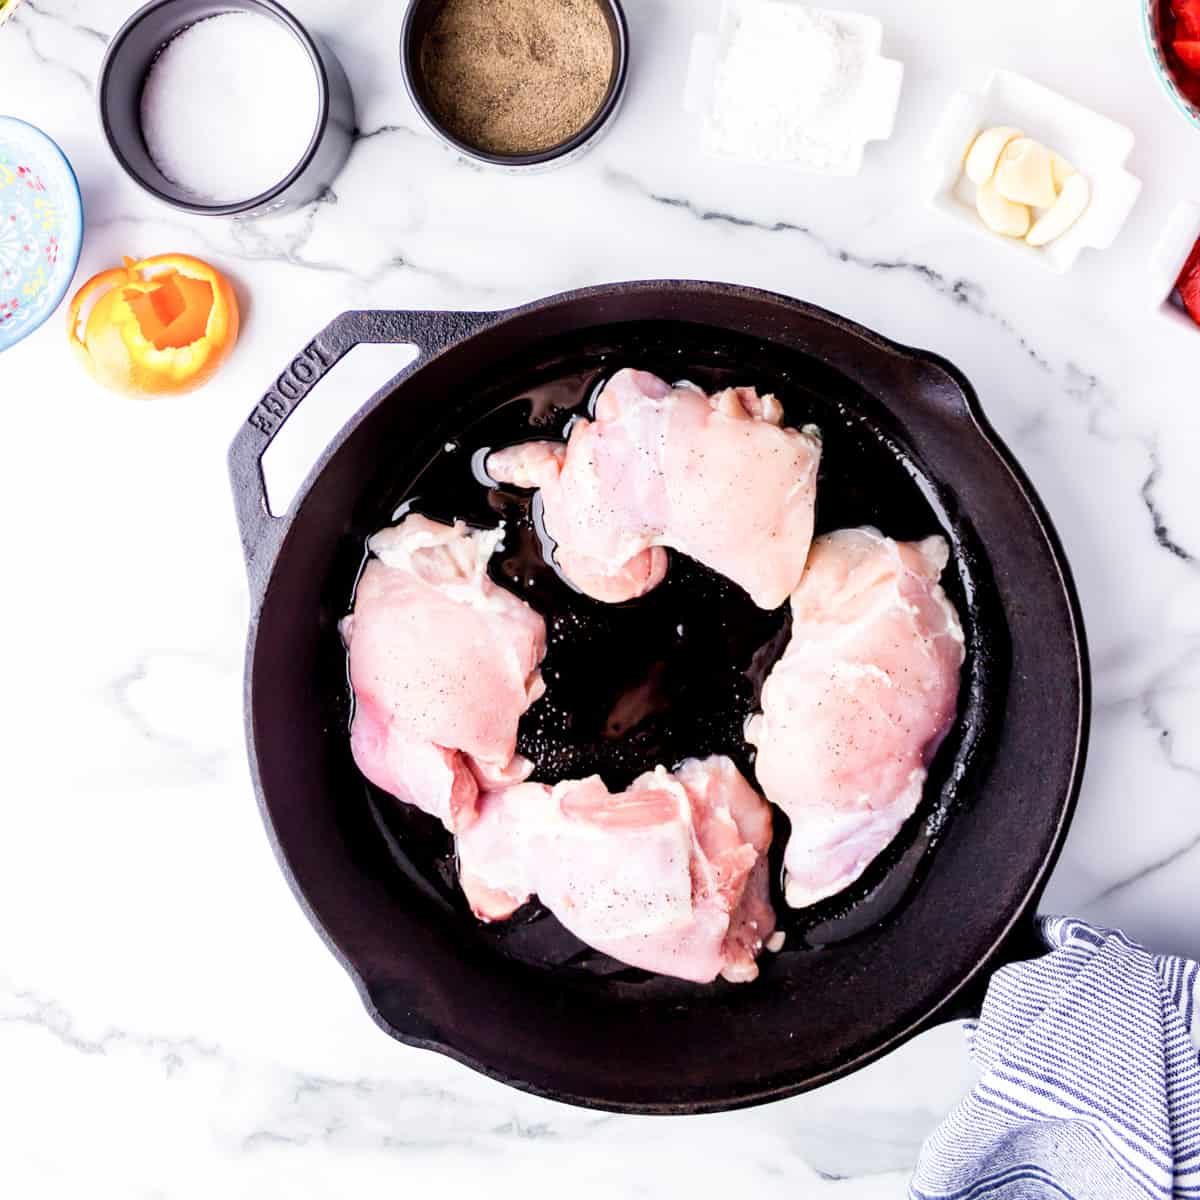 Skinless chicken cooking in skillet.